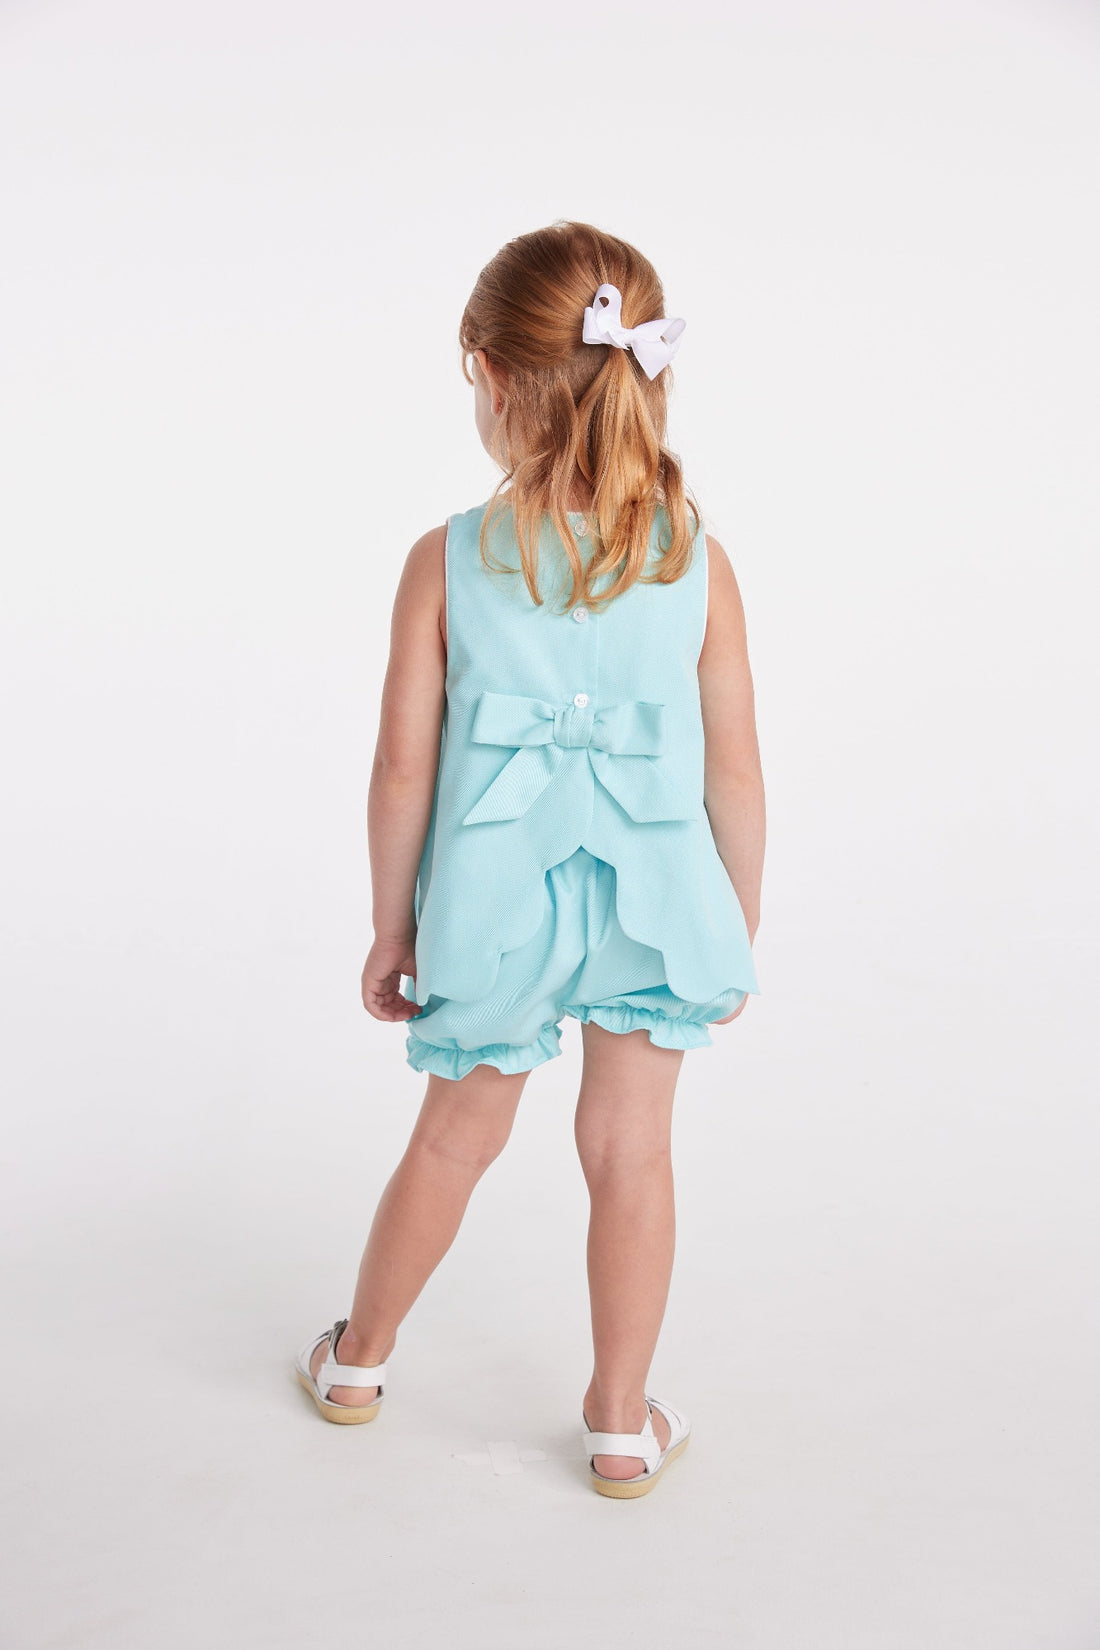 classic childrens clothing girls bloomer set in aqua with bow in the back and applique sailboat on chest